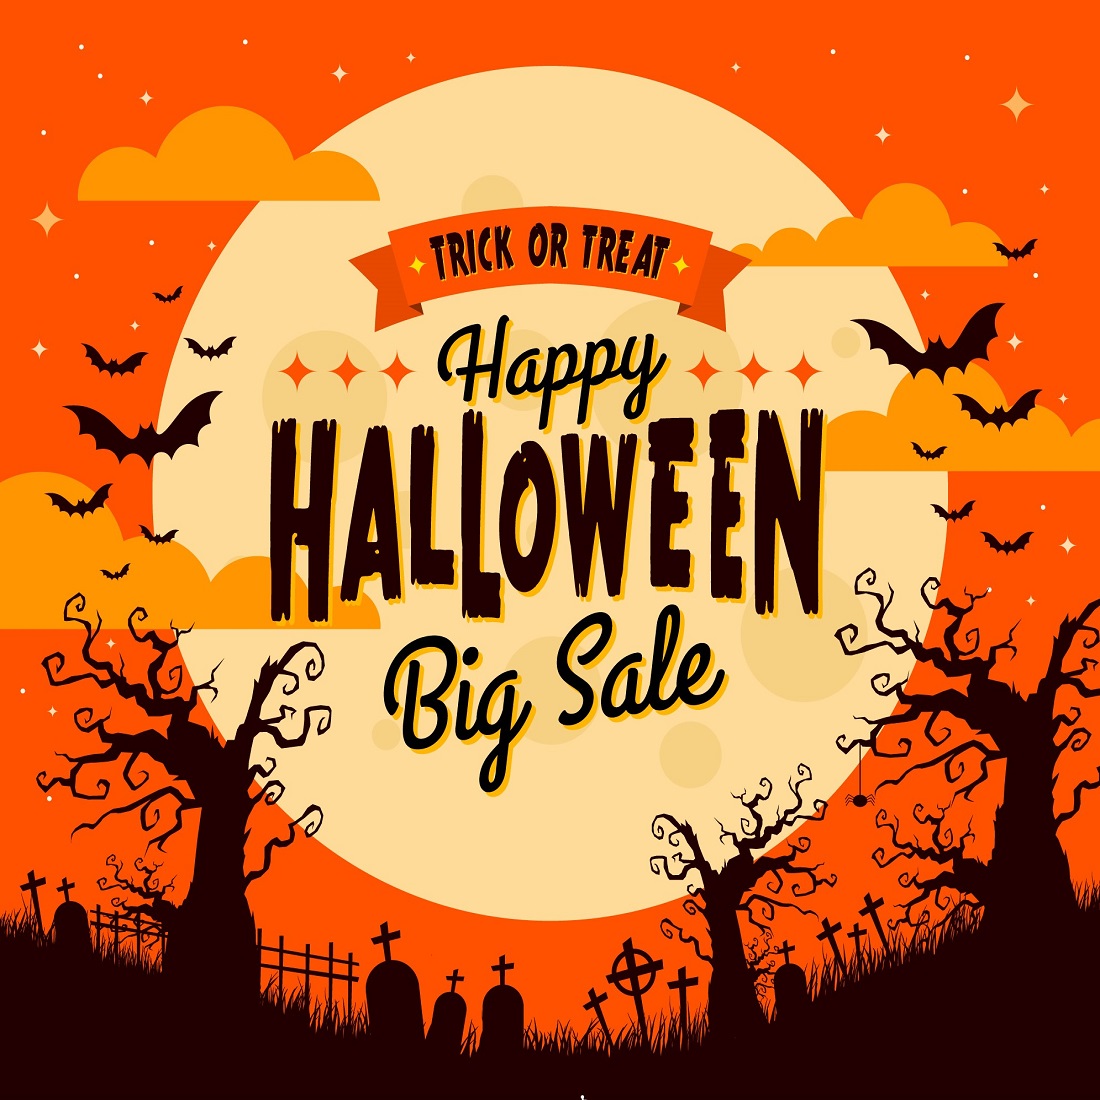 Halloween sale background preview image.